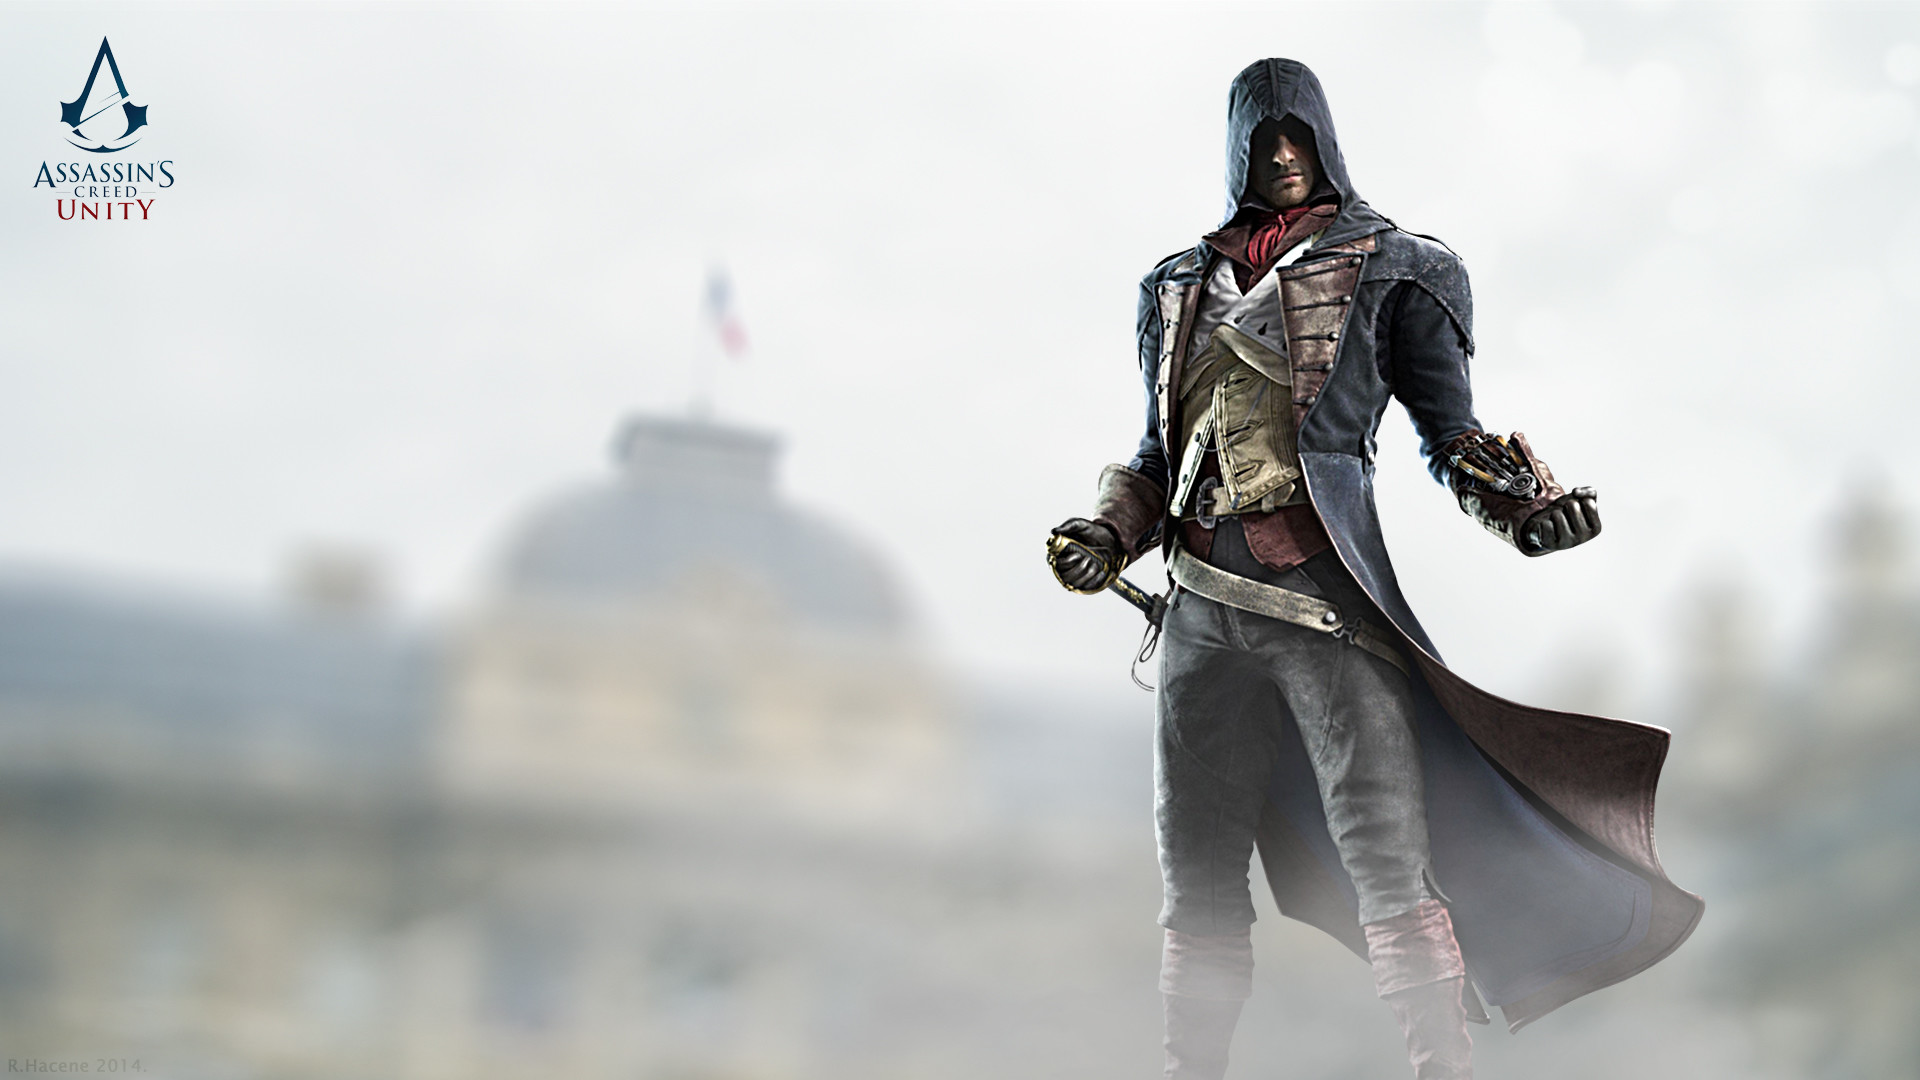 1920x1080 2014 Assassin's Creed Unity Game wallpapers (81 Wallpapers) – HD Wallpapers